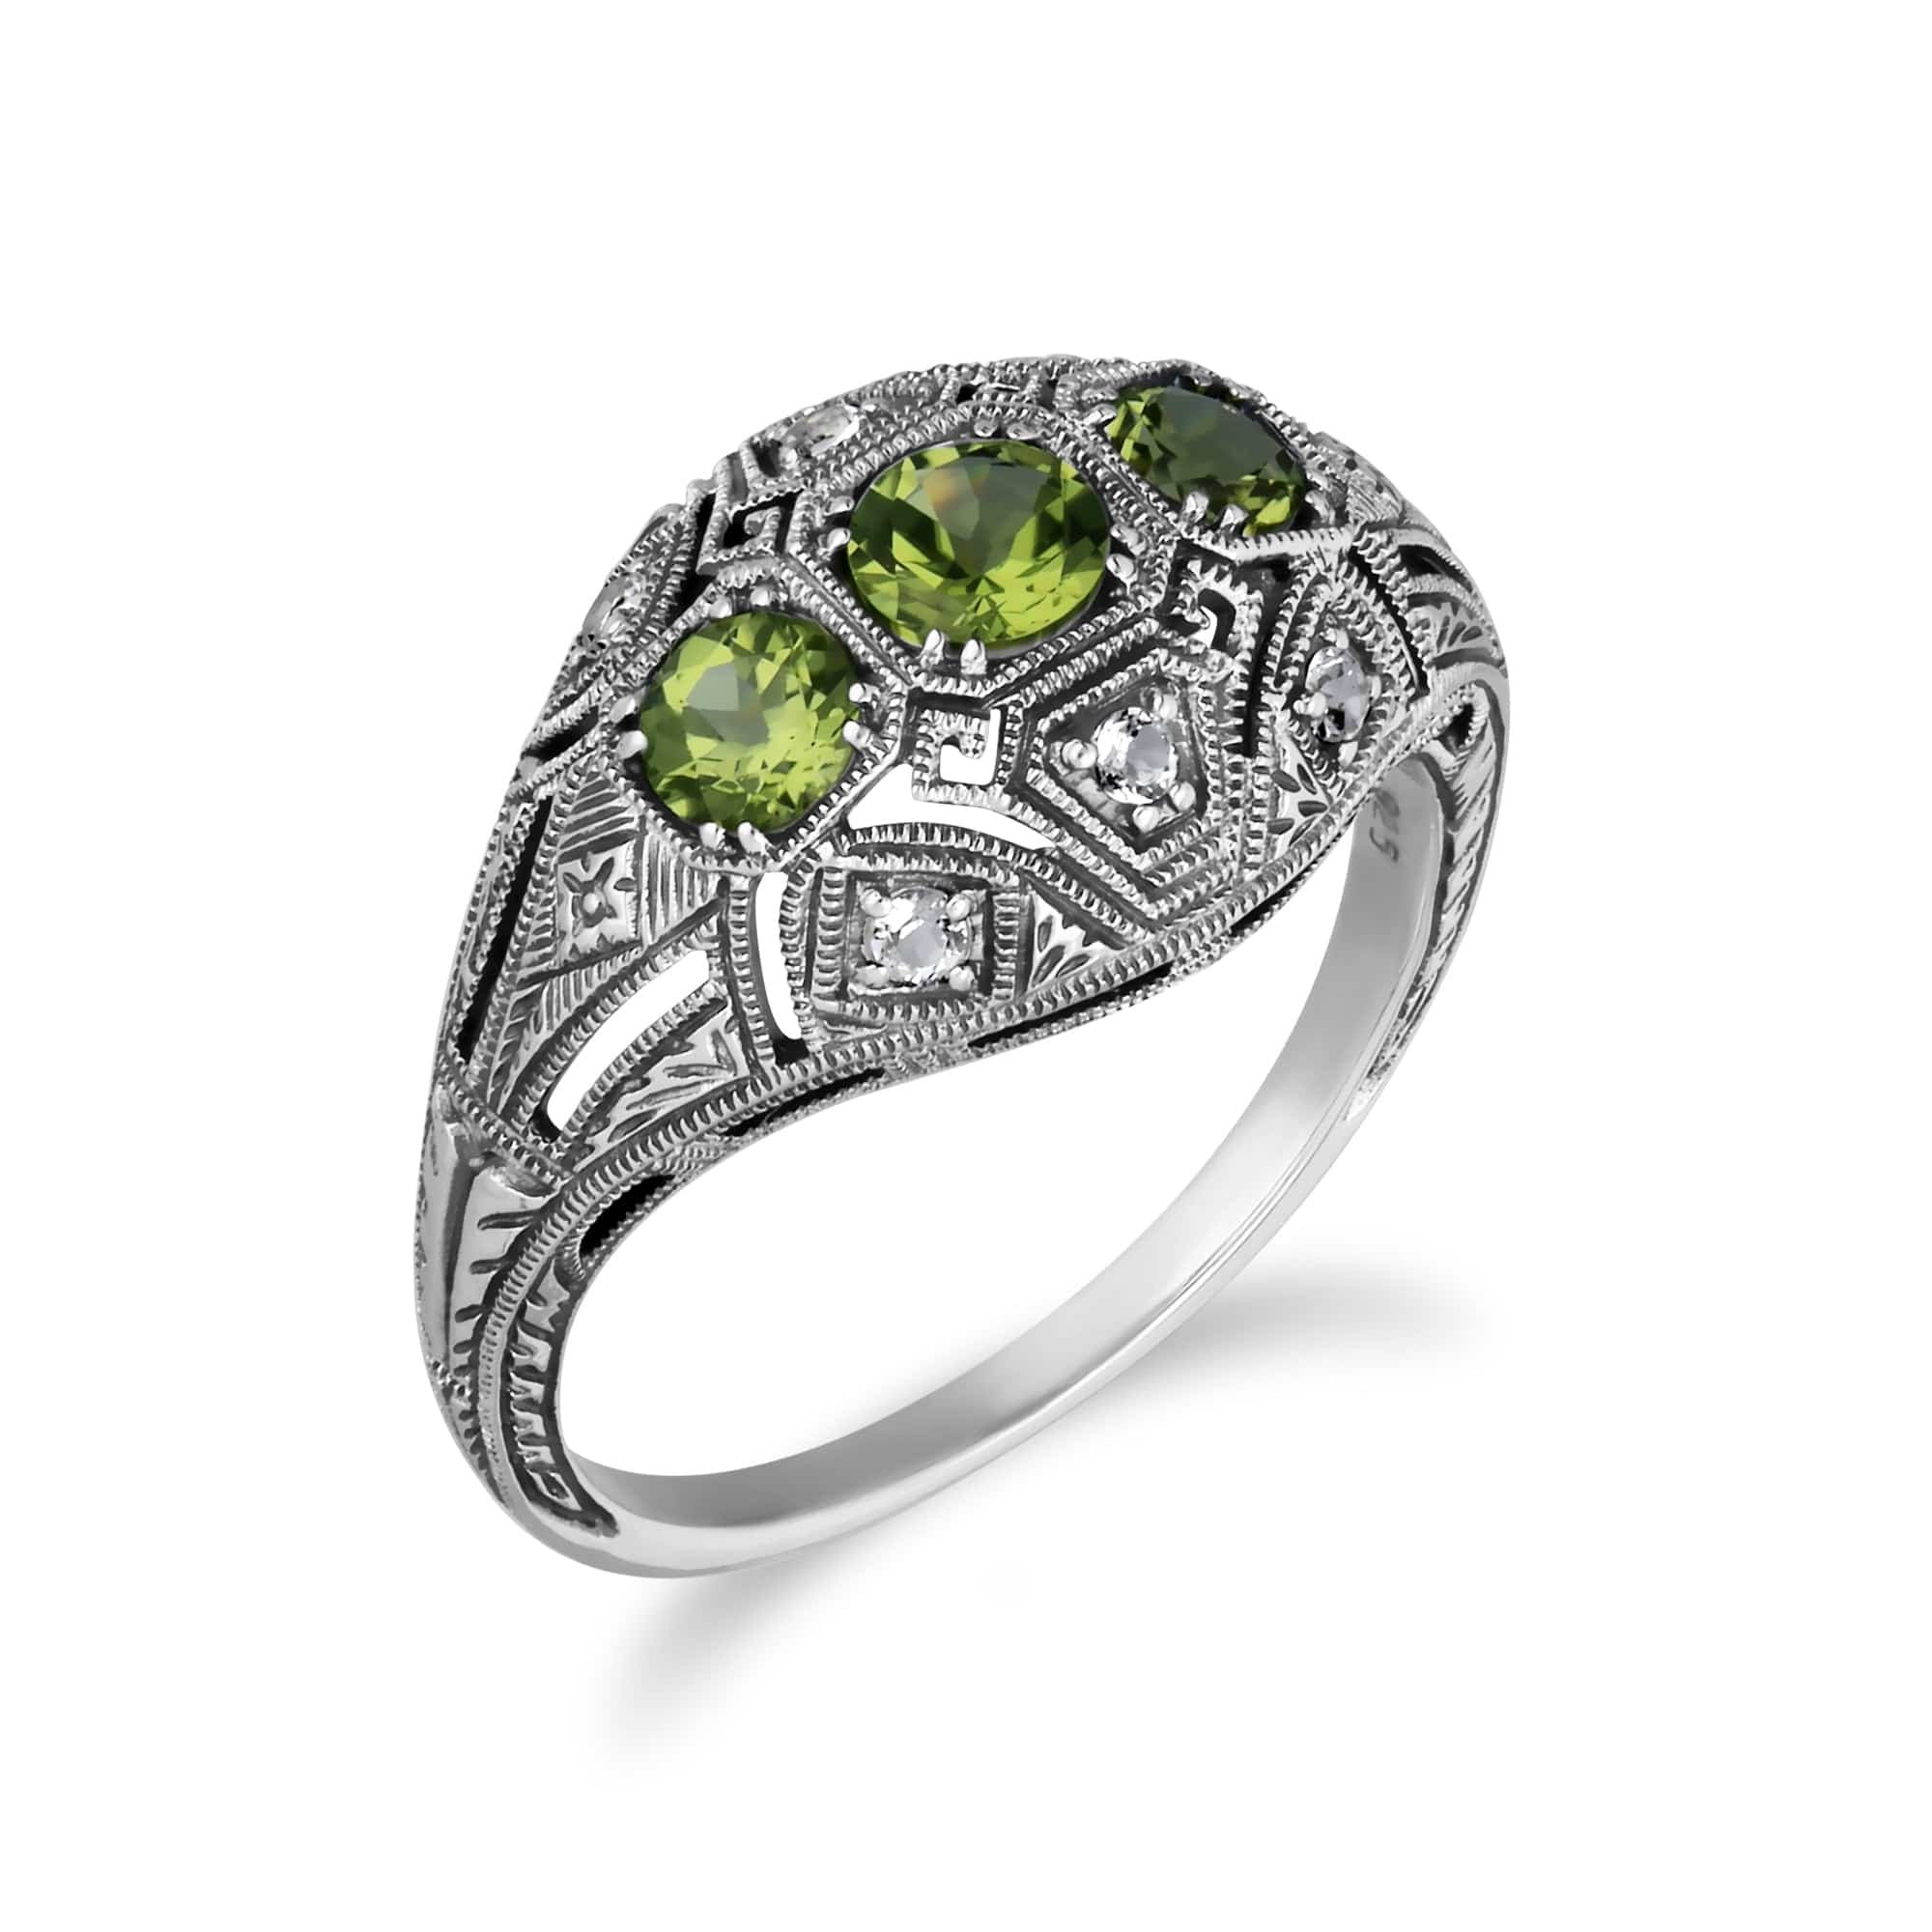 241R210404925 Art Deco Style Round Peridot & White Topaz Three Stone Ring in 925 Sterling Silver 2